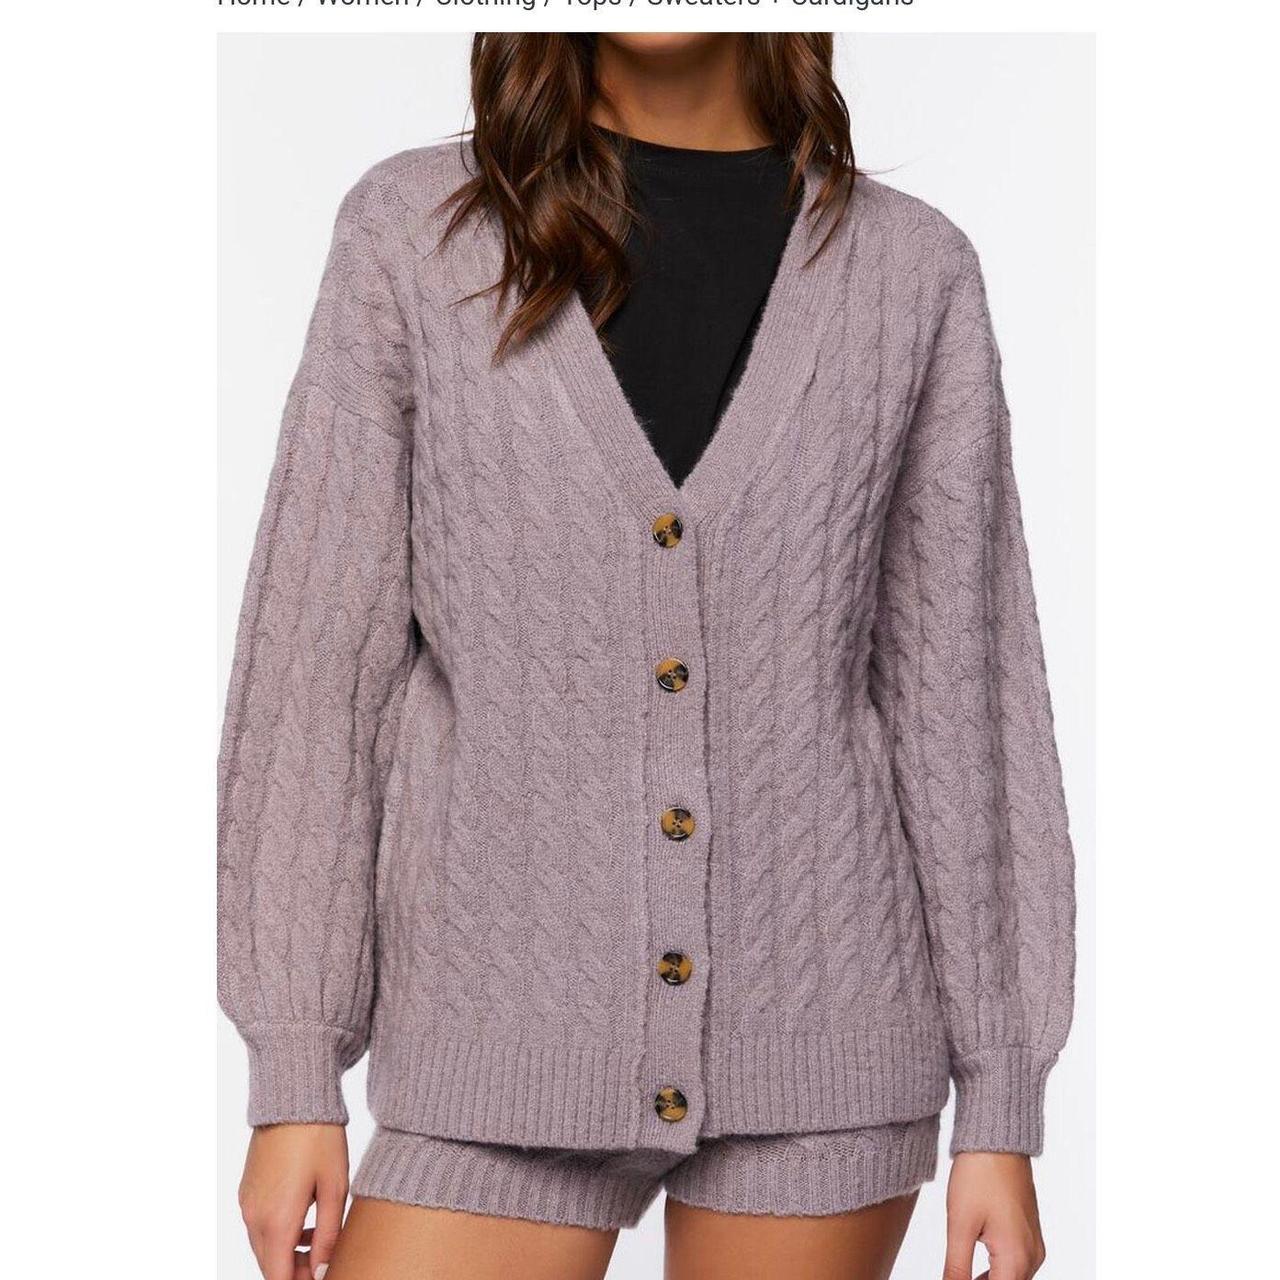 Brandy Melville One Size Knitted Open Front Cardigan Oversized Purple